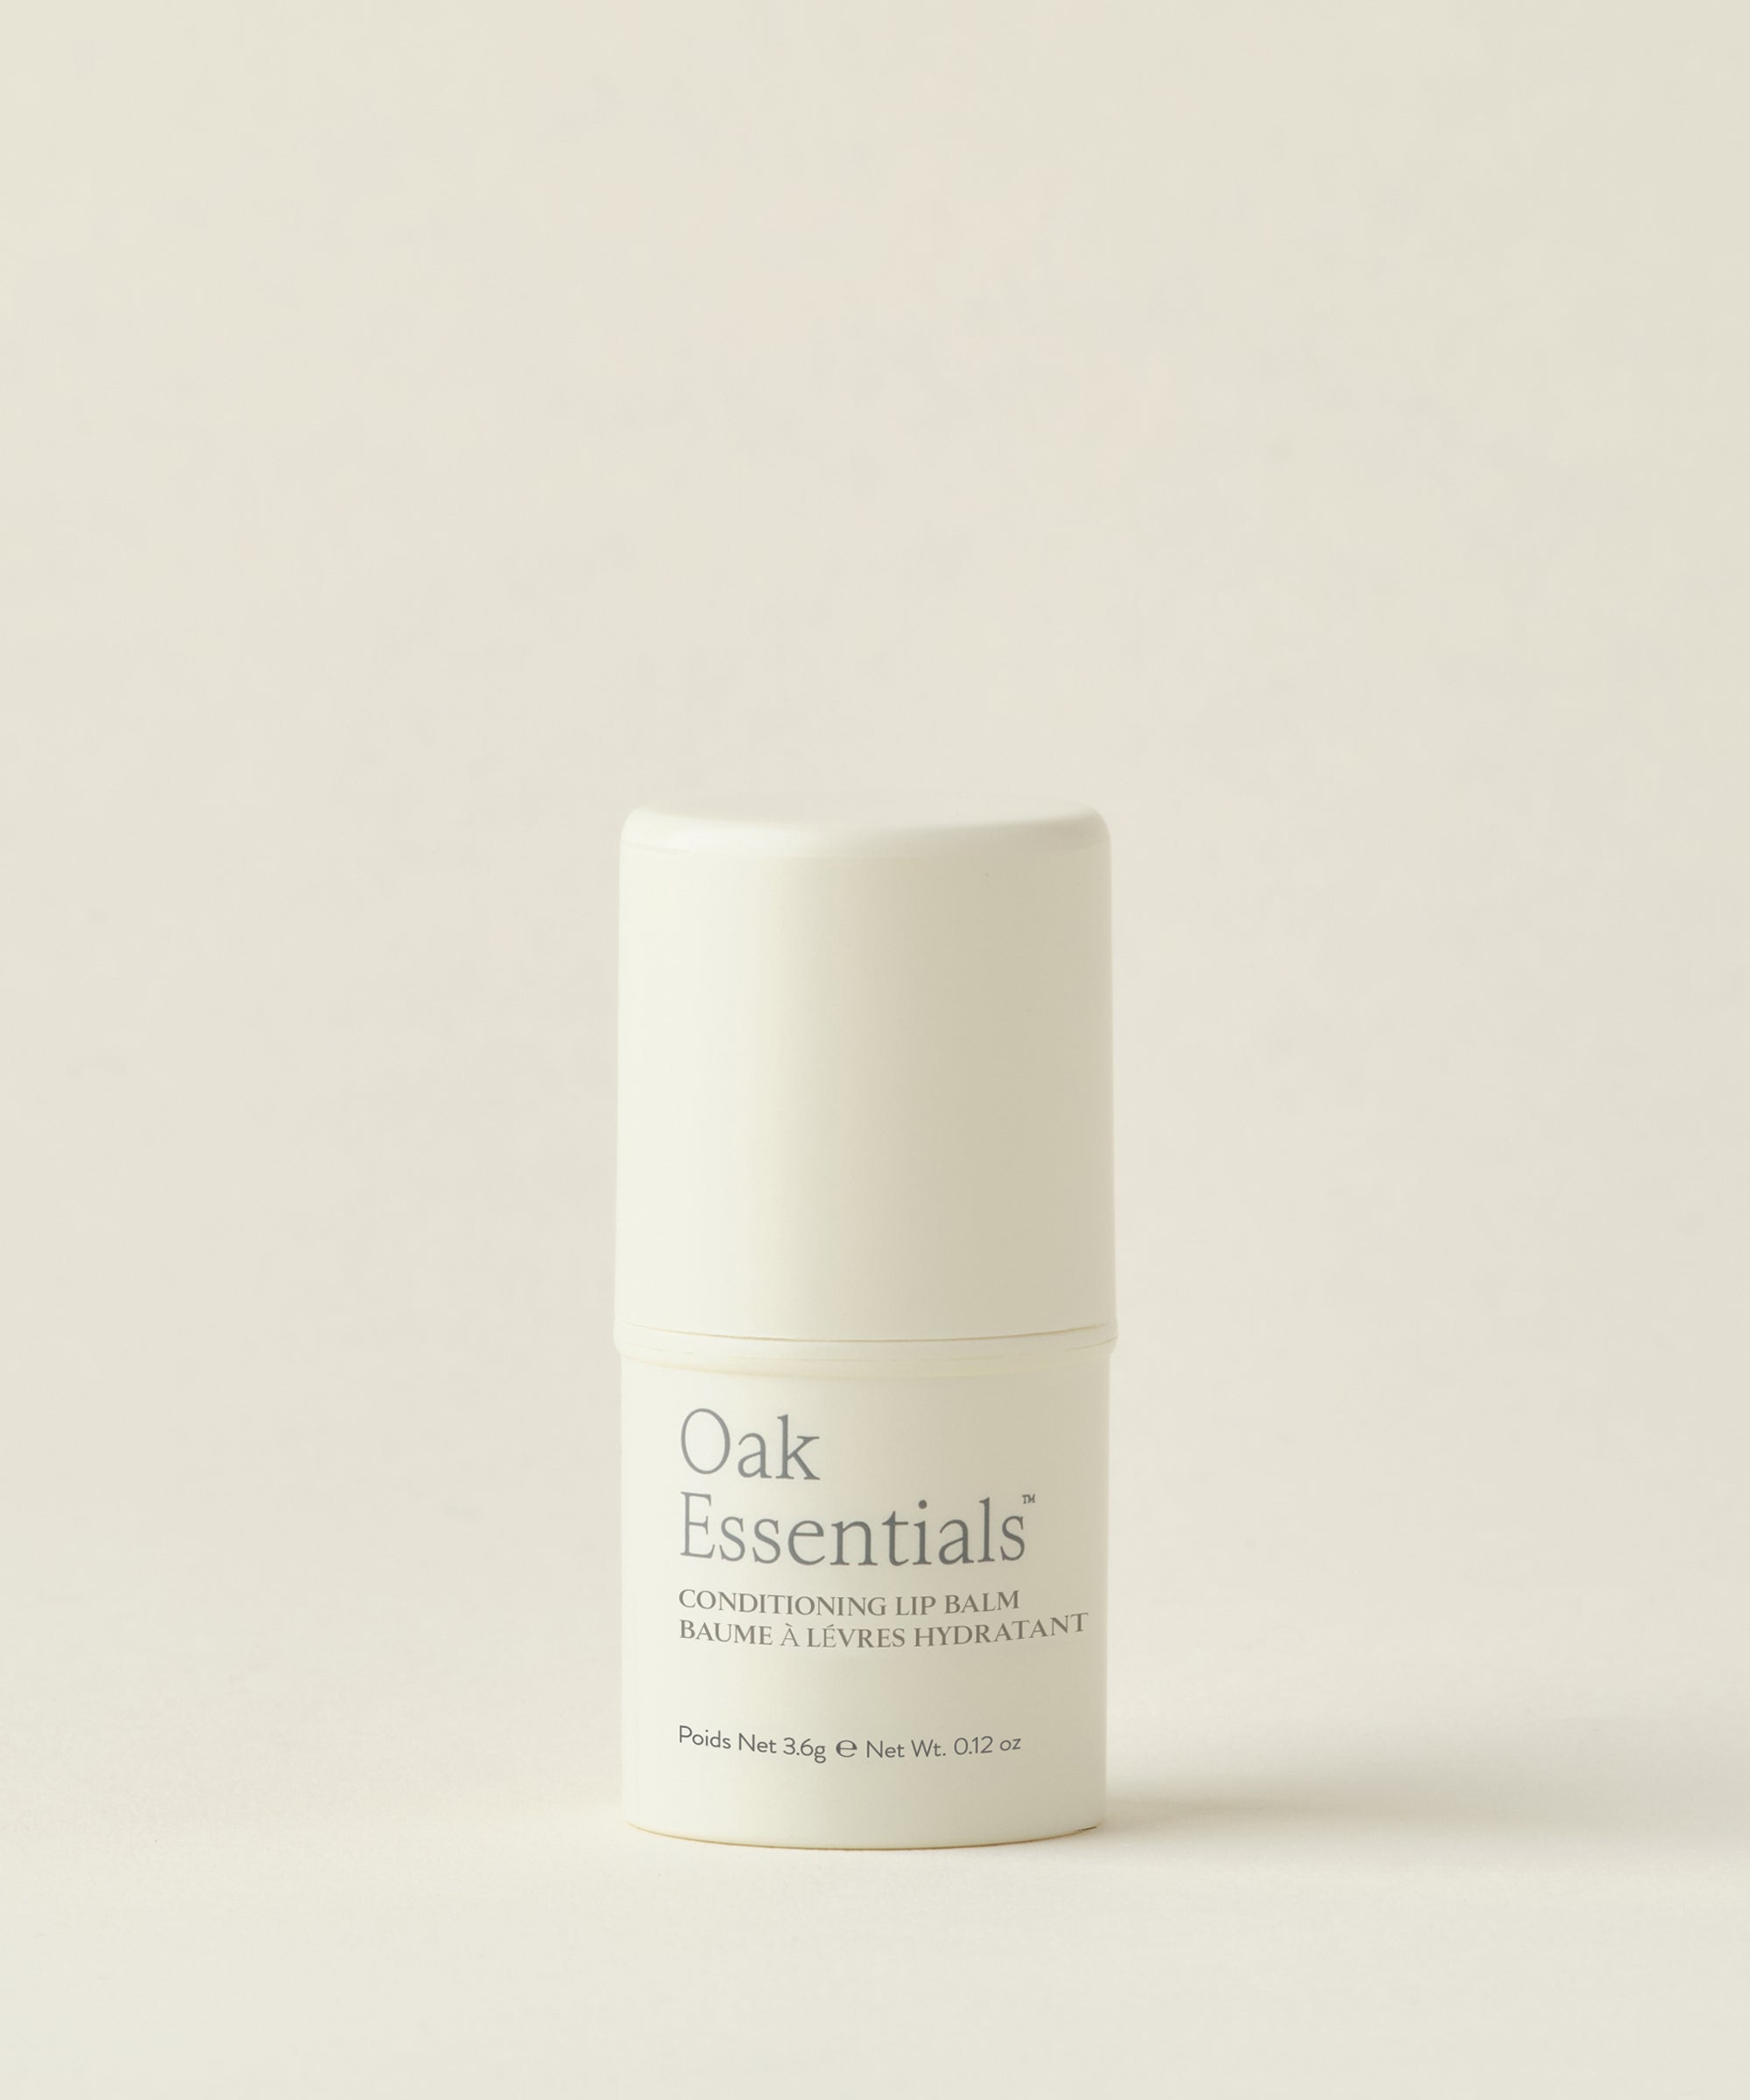 Blossom Essentials - Dry Skin Relief Without Compromise